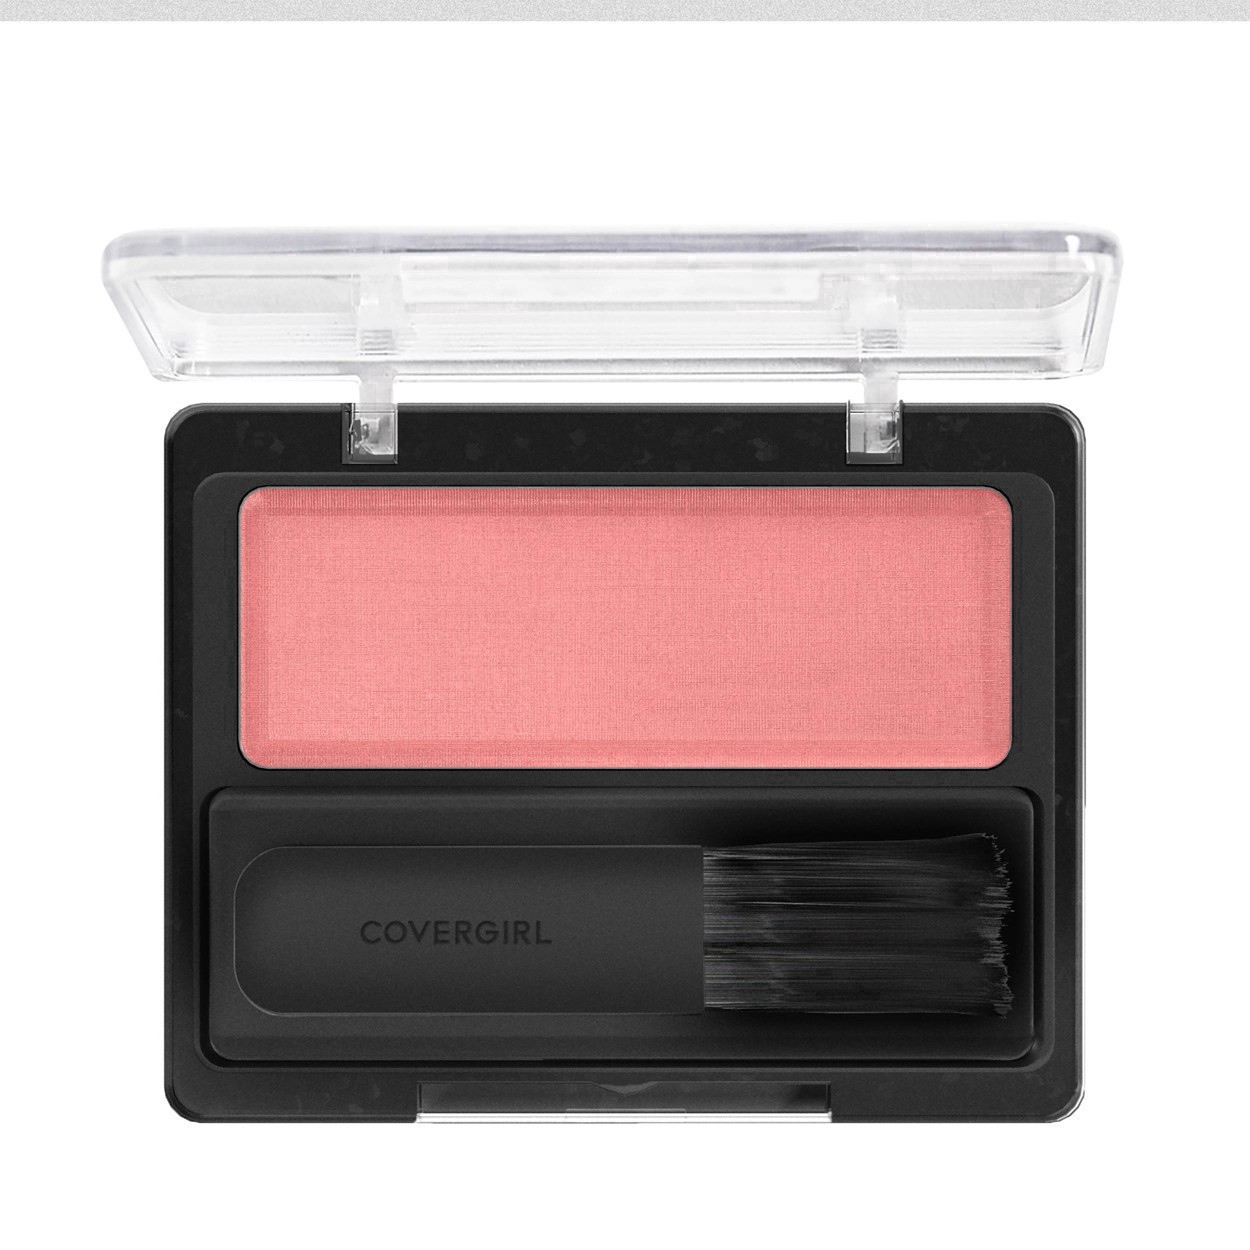 slide 39 of 42, COTY COVERGIRL COVERGIRL Classic Color Blush Rose Silk, 1 ct